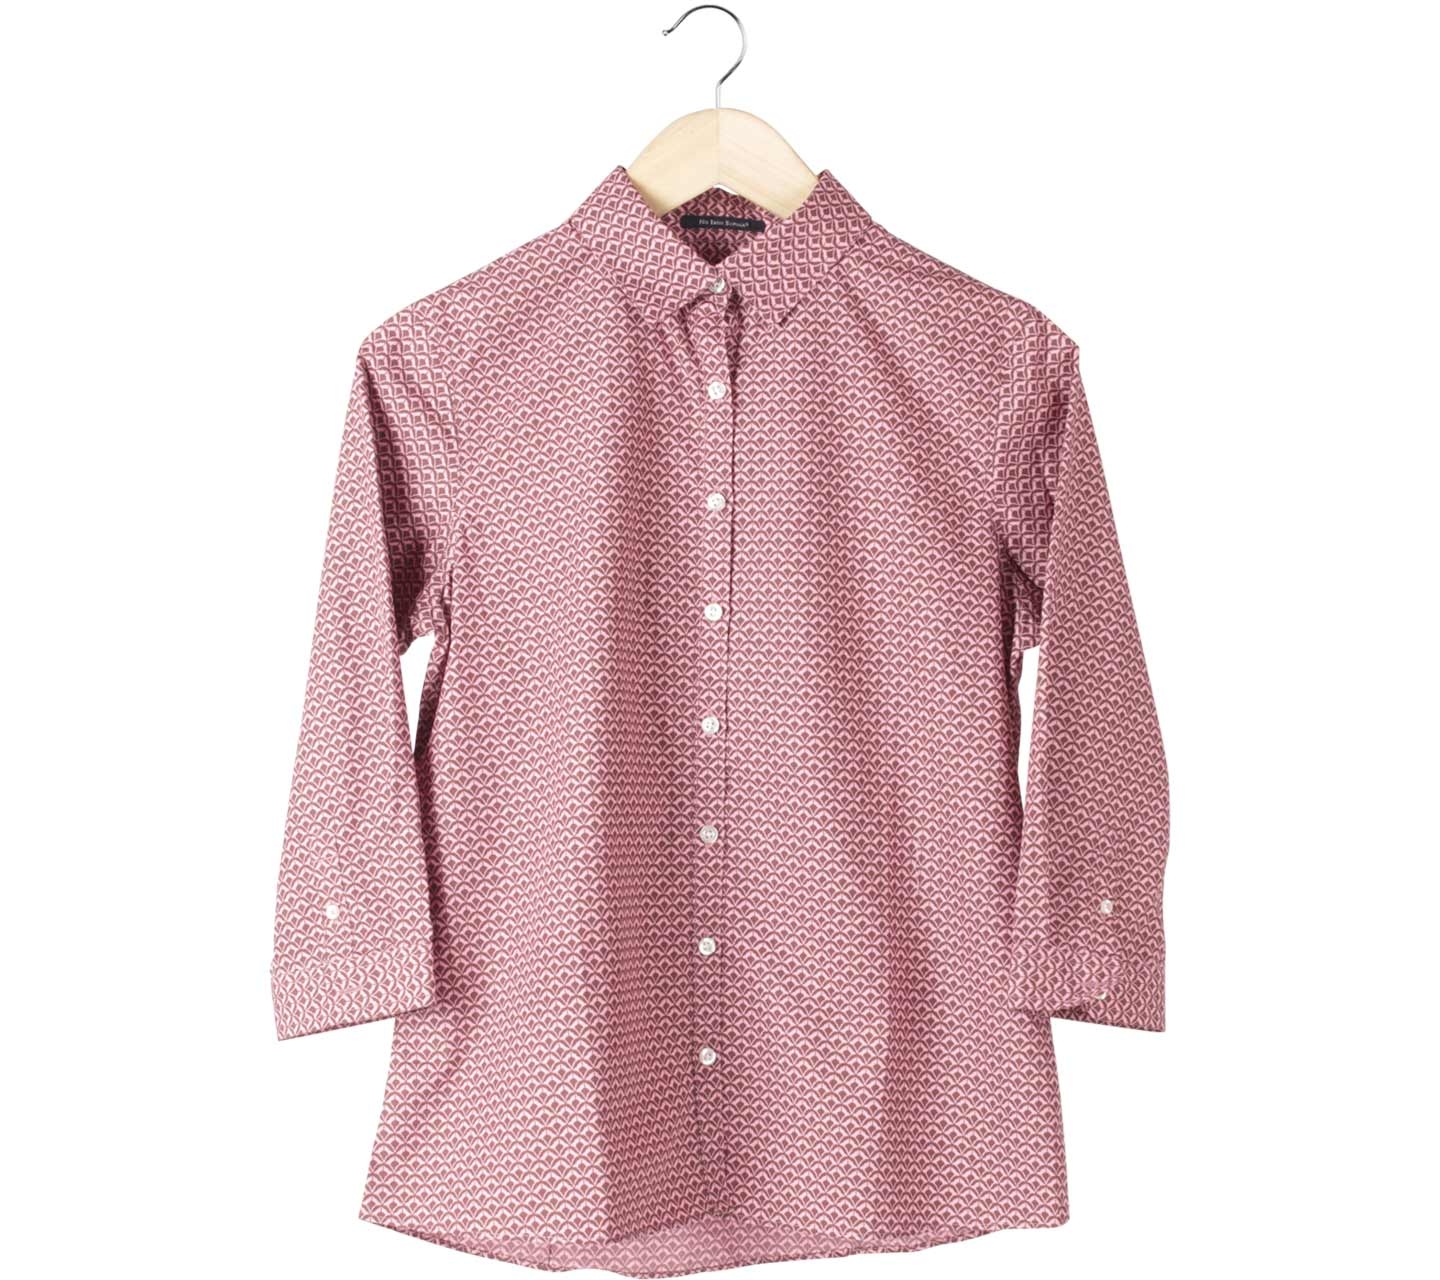 Lands'End Pink And Brown Shirt